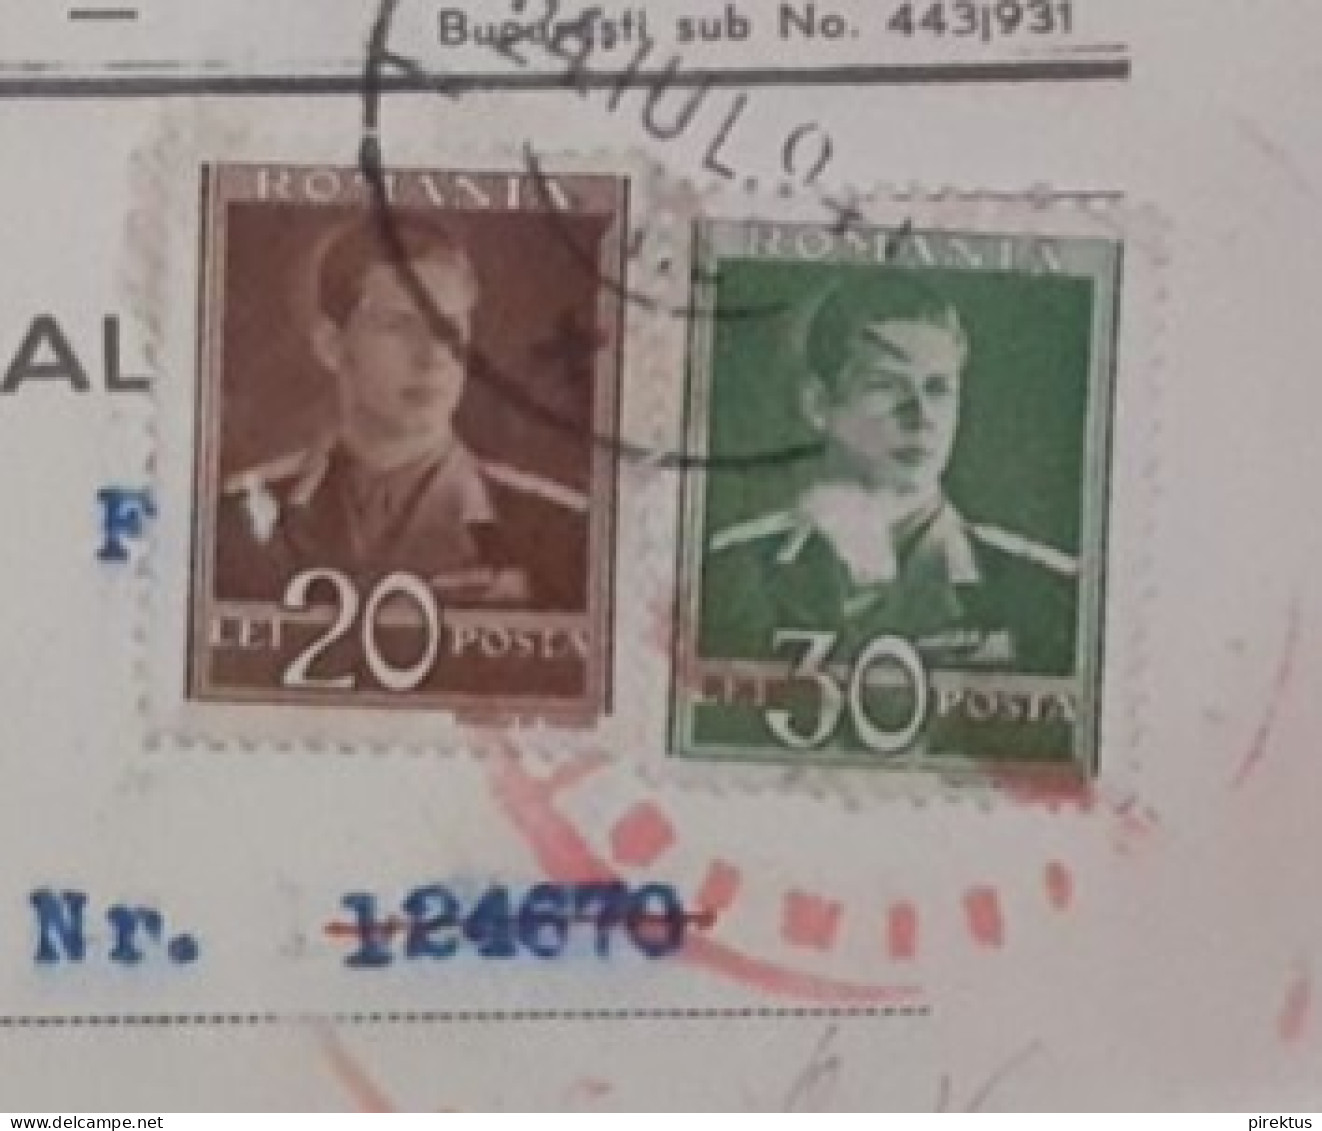 Romania 1941 Post Cancel Card - Covers & Documents